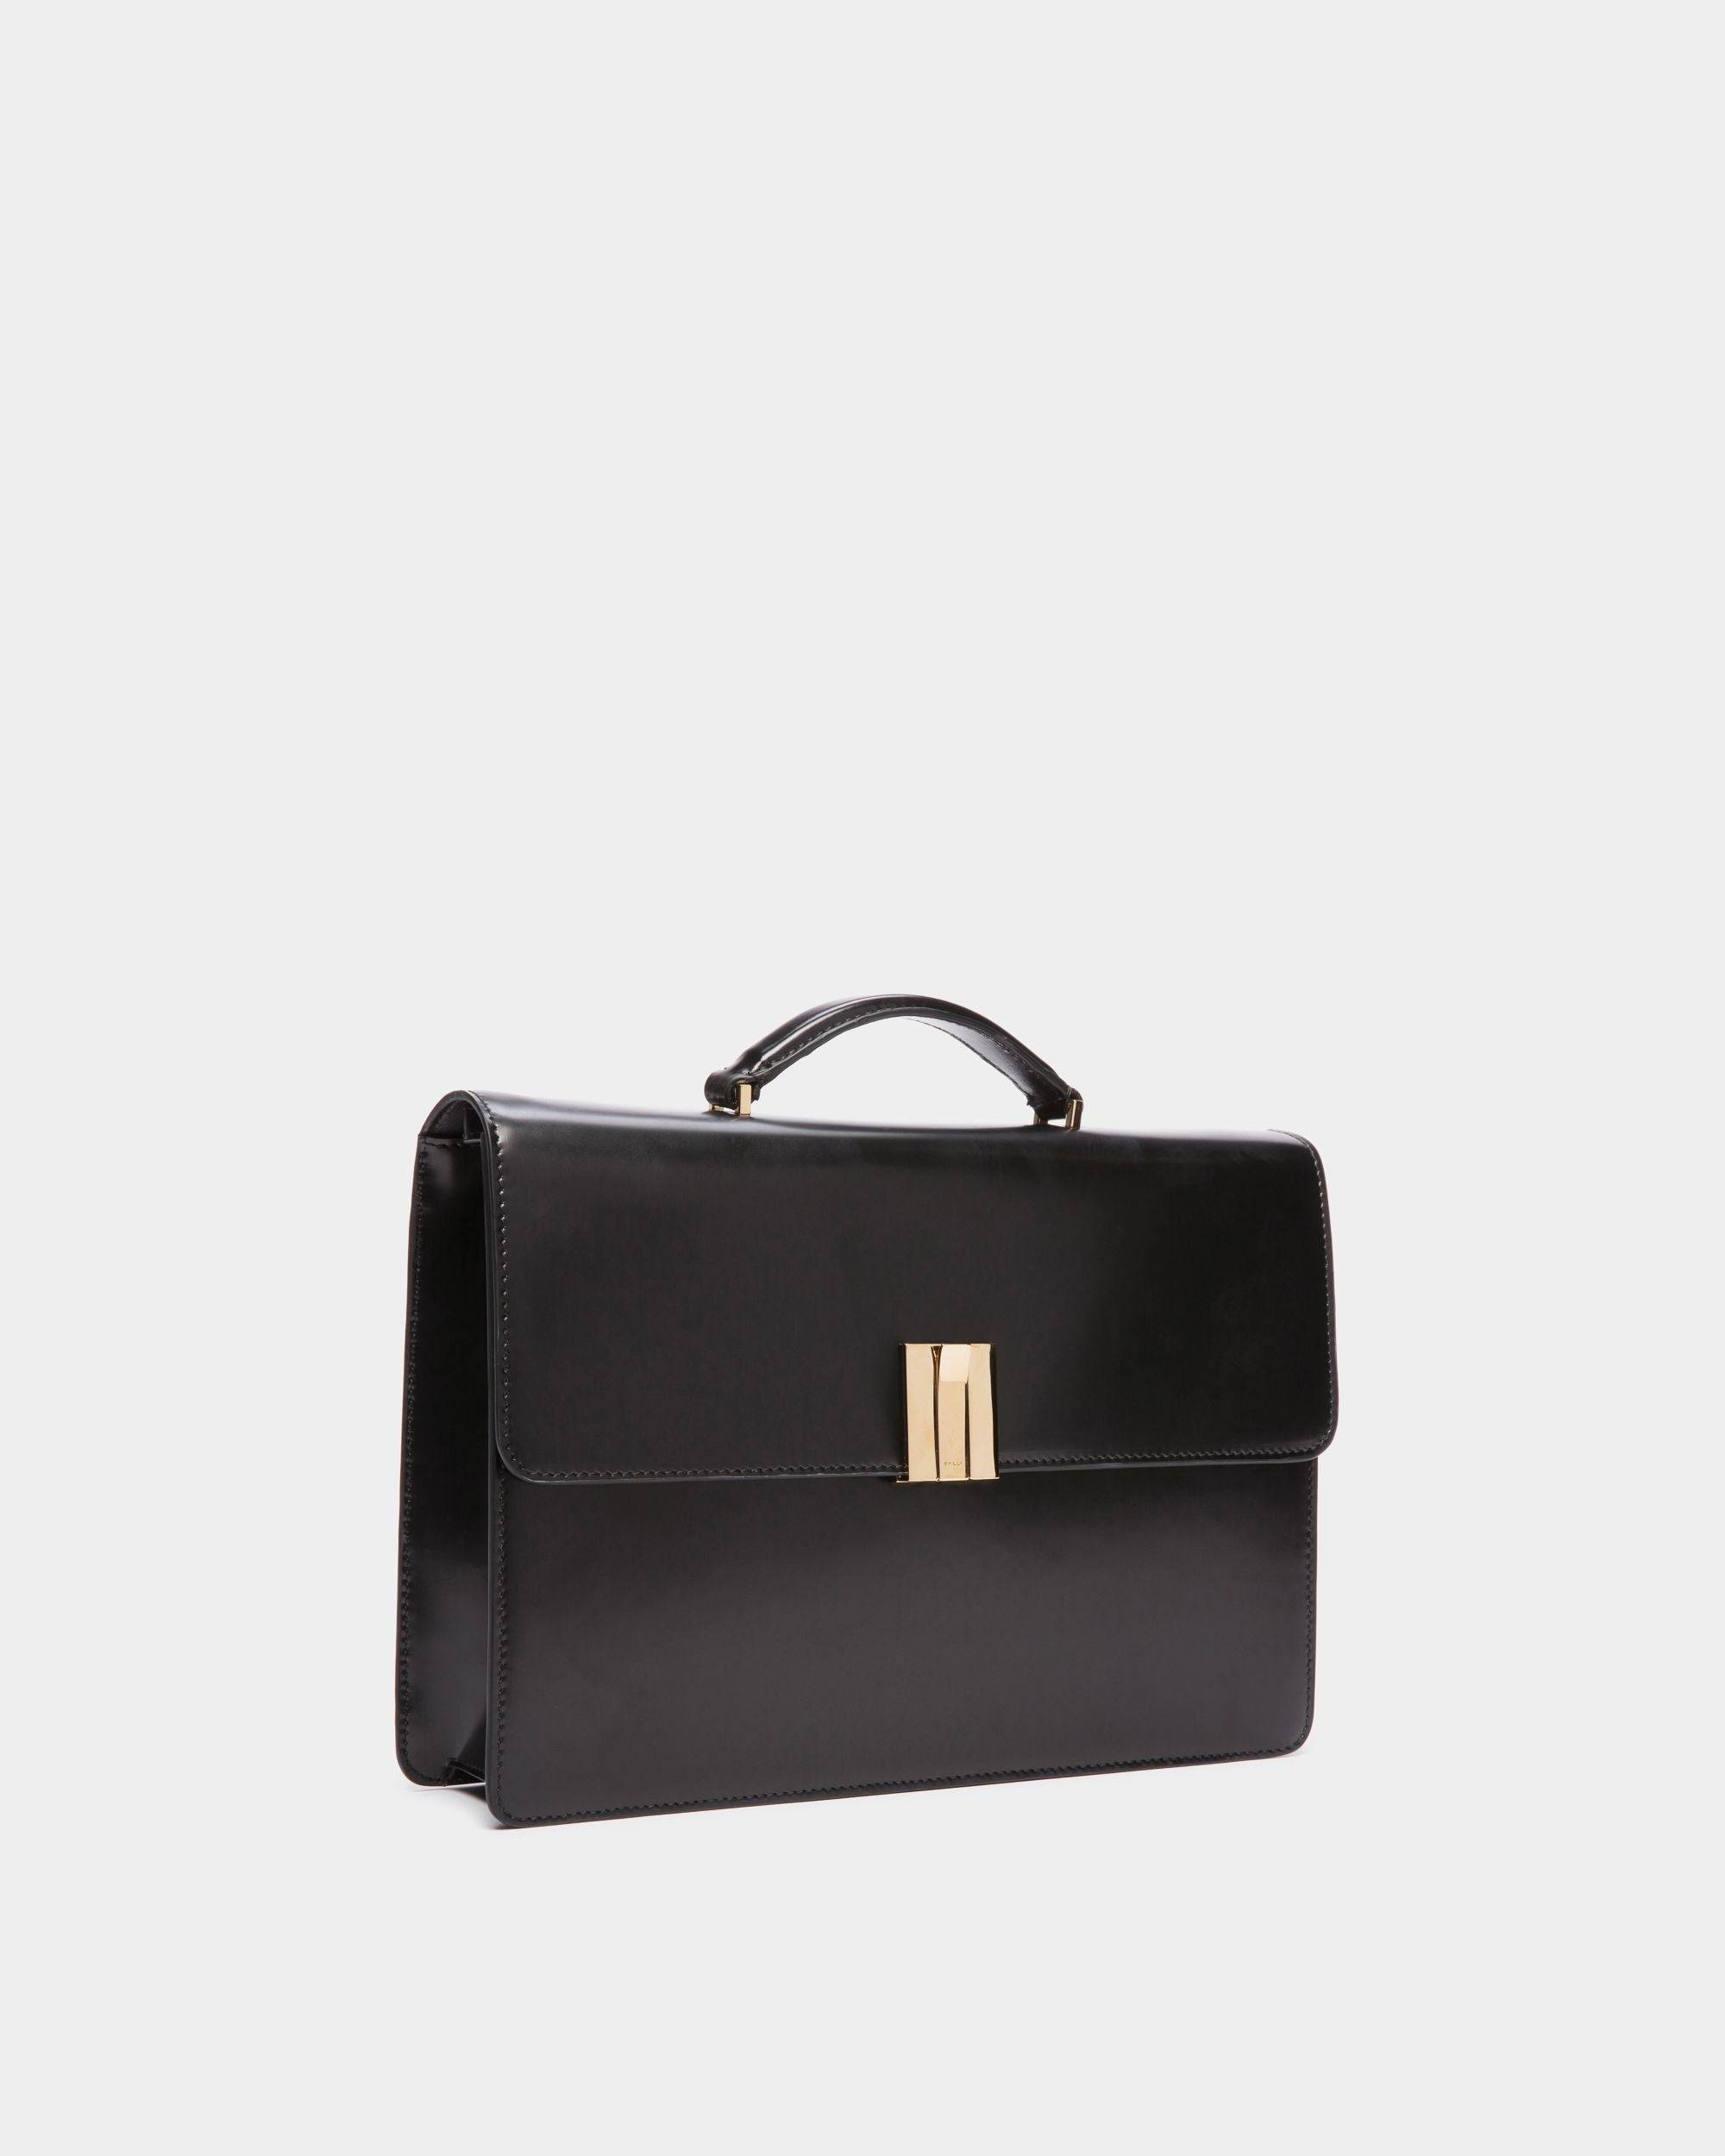 Ollam | Women's Top Handle Bag in Black Brushed Leather | Bally | Still Life 3/4 Front